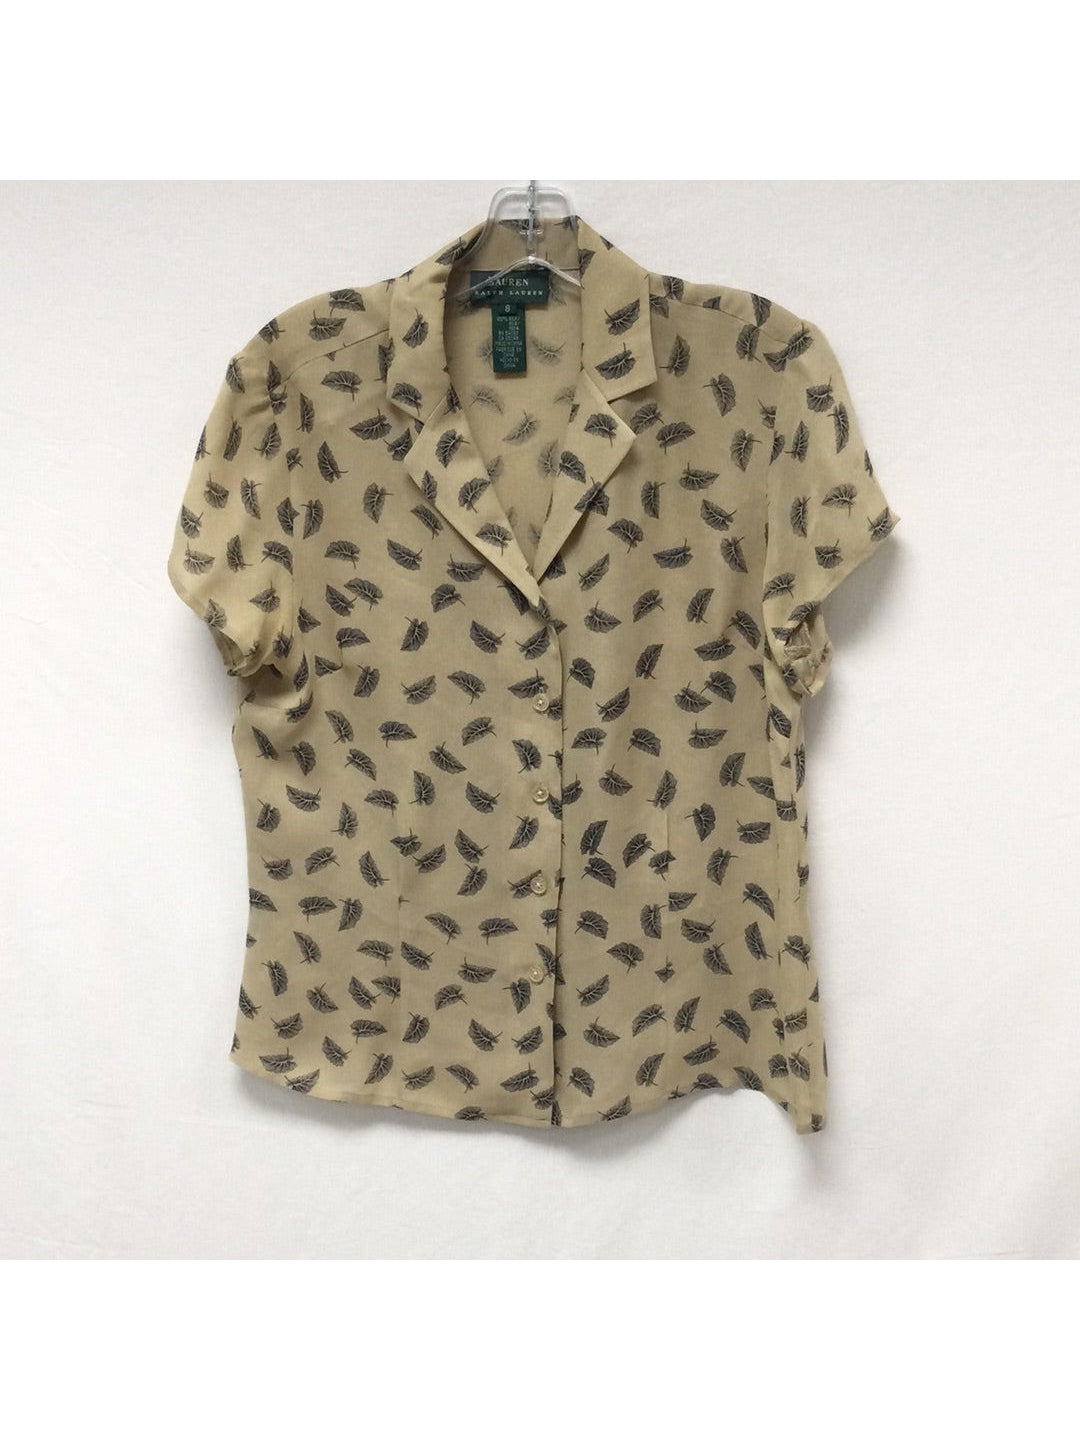 Ralph Lauren Leaf Printed Shirt - The Kennedy Collective Thrift - 